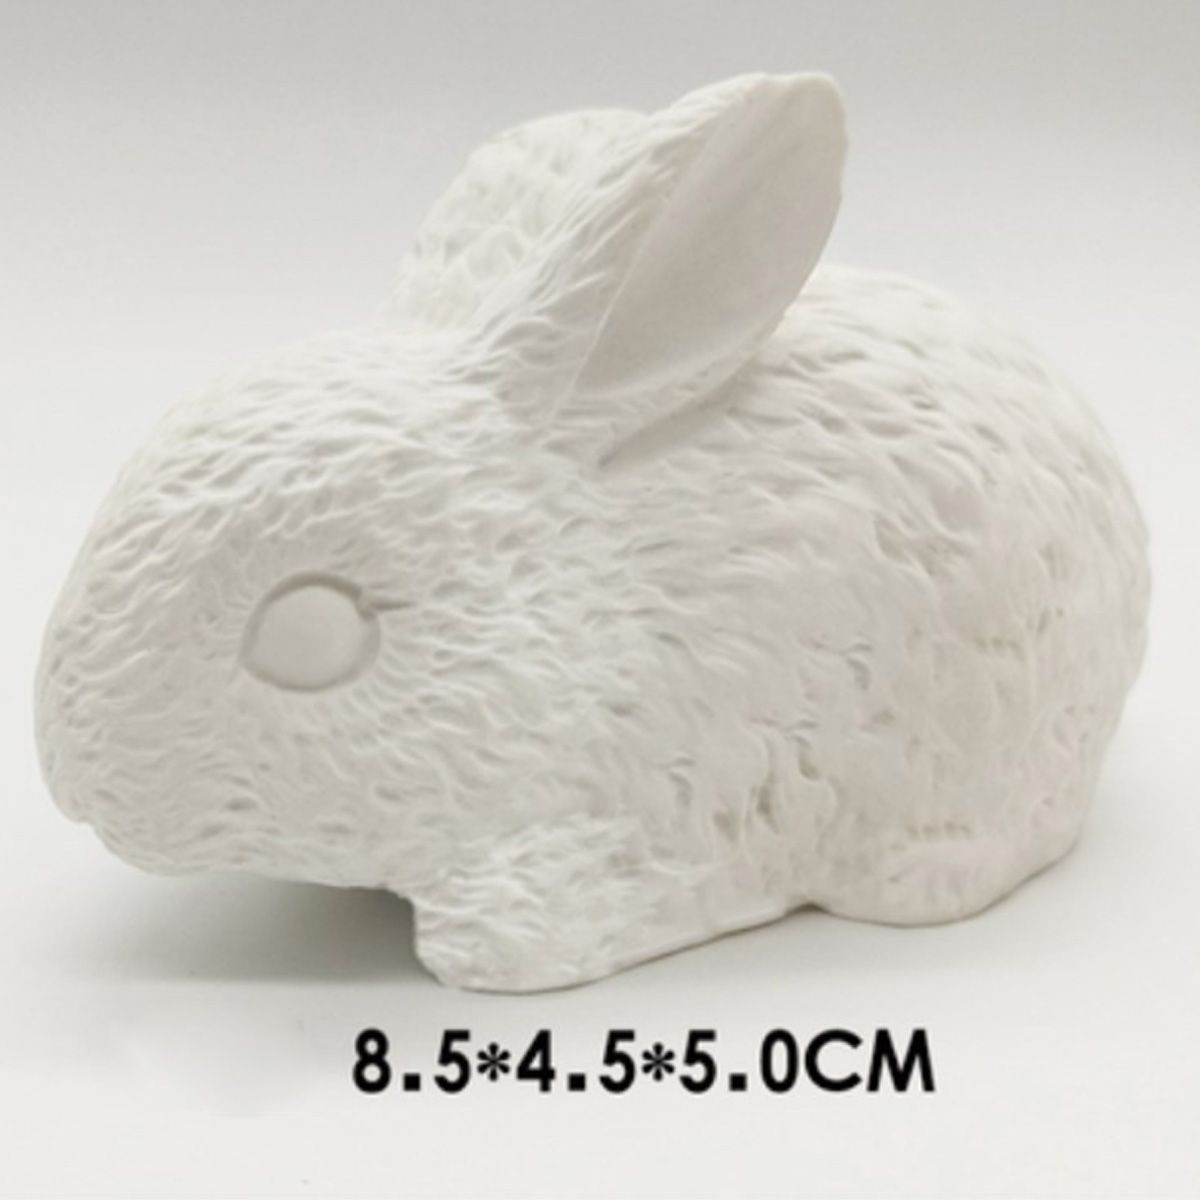 Bunny-3D-DIY-Rabbit-Handmade-Cake-Breads-Decorating-Chocolates-Mold-Mould-Easter-1563902